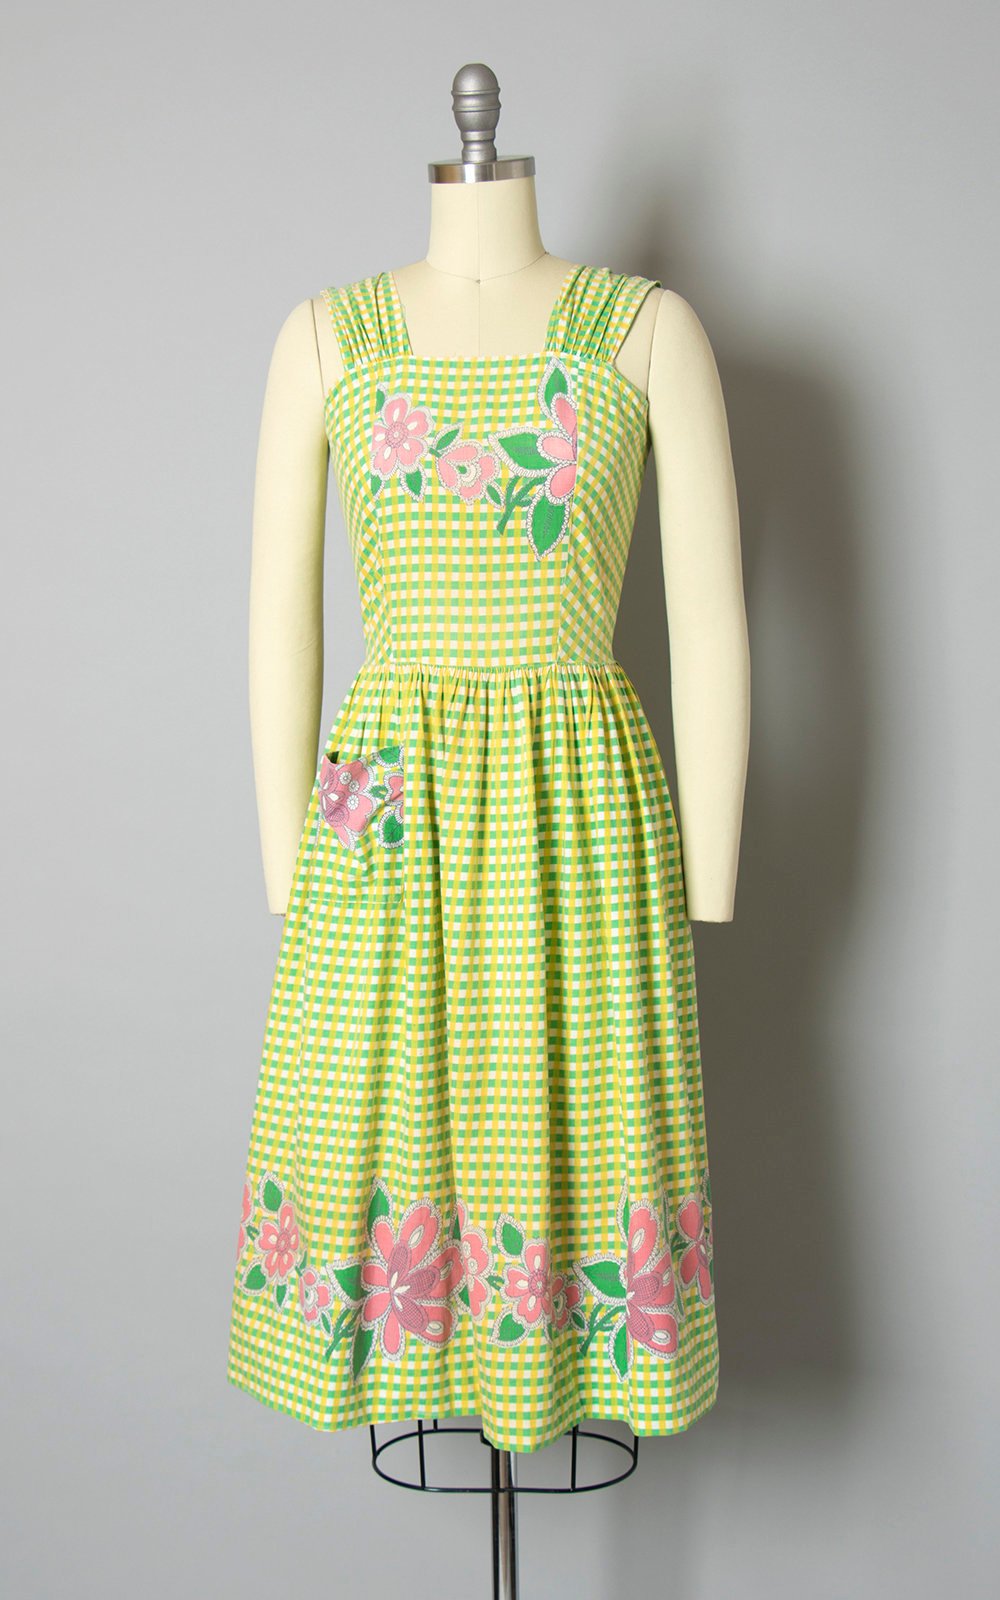 Vintage 1940s Dress | 40s Floral Border Print Gingham Cotton Sundress Green Yellow Full Skirt Day Dress with Pocket (x-small)